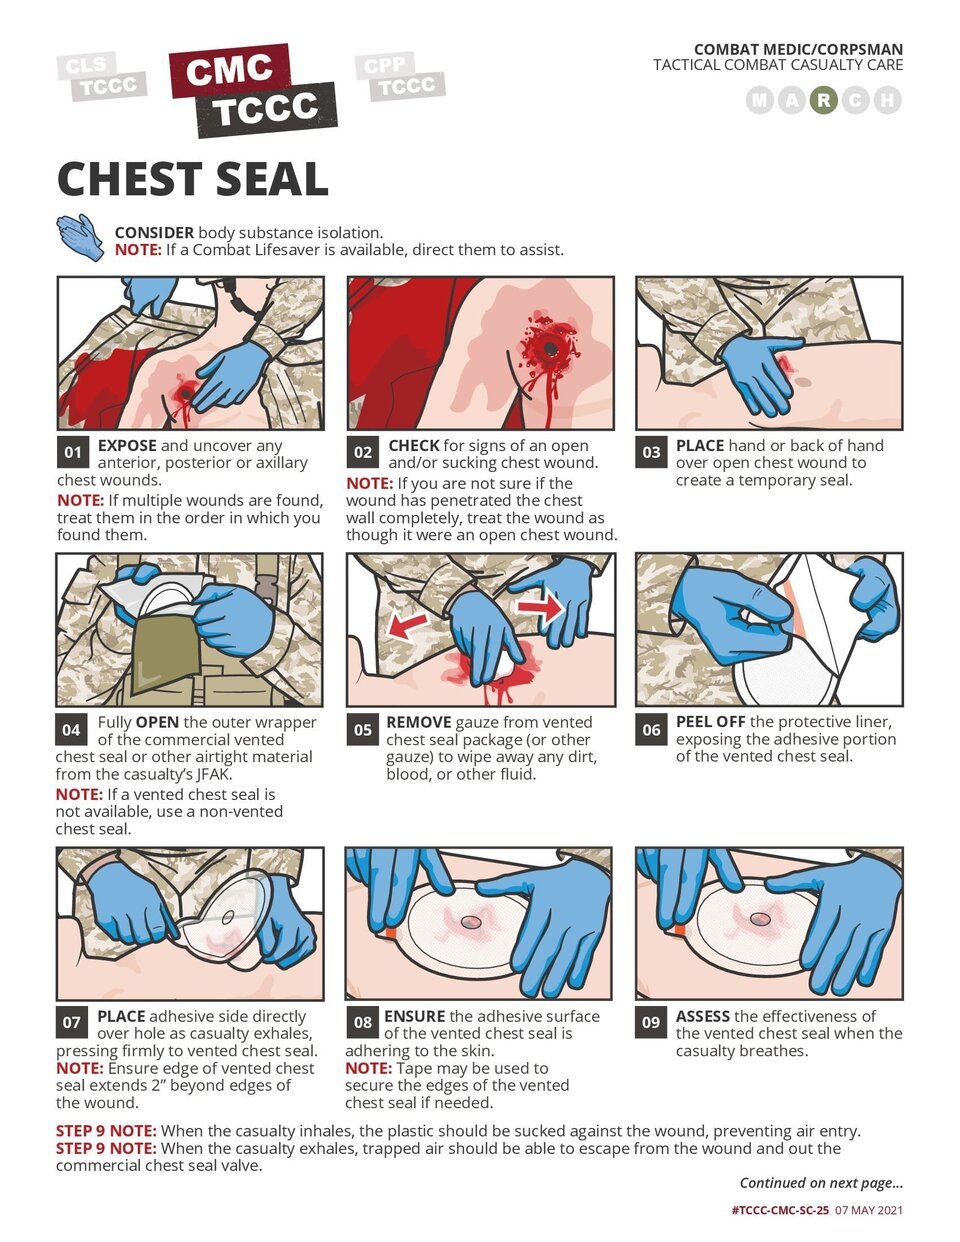 Chest Seal Application